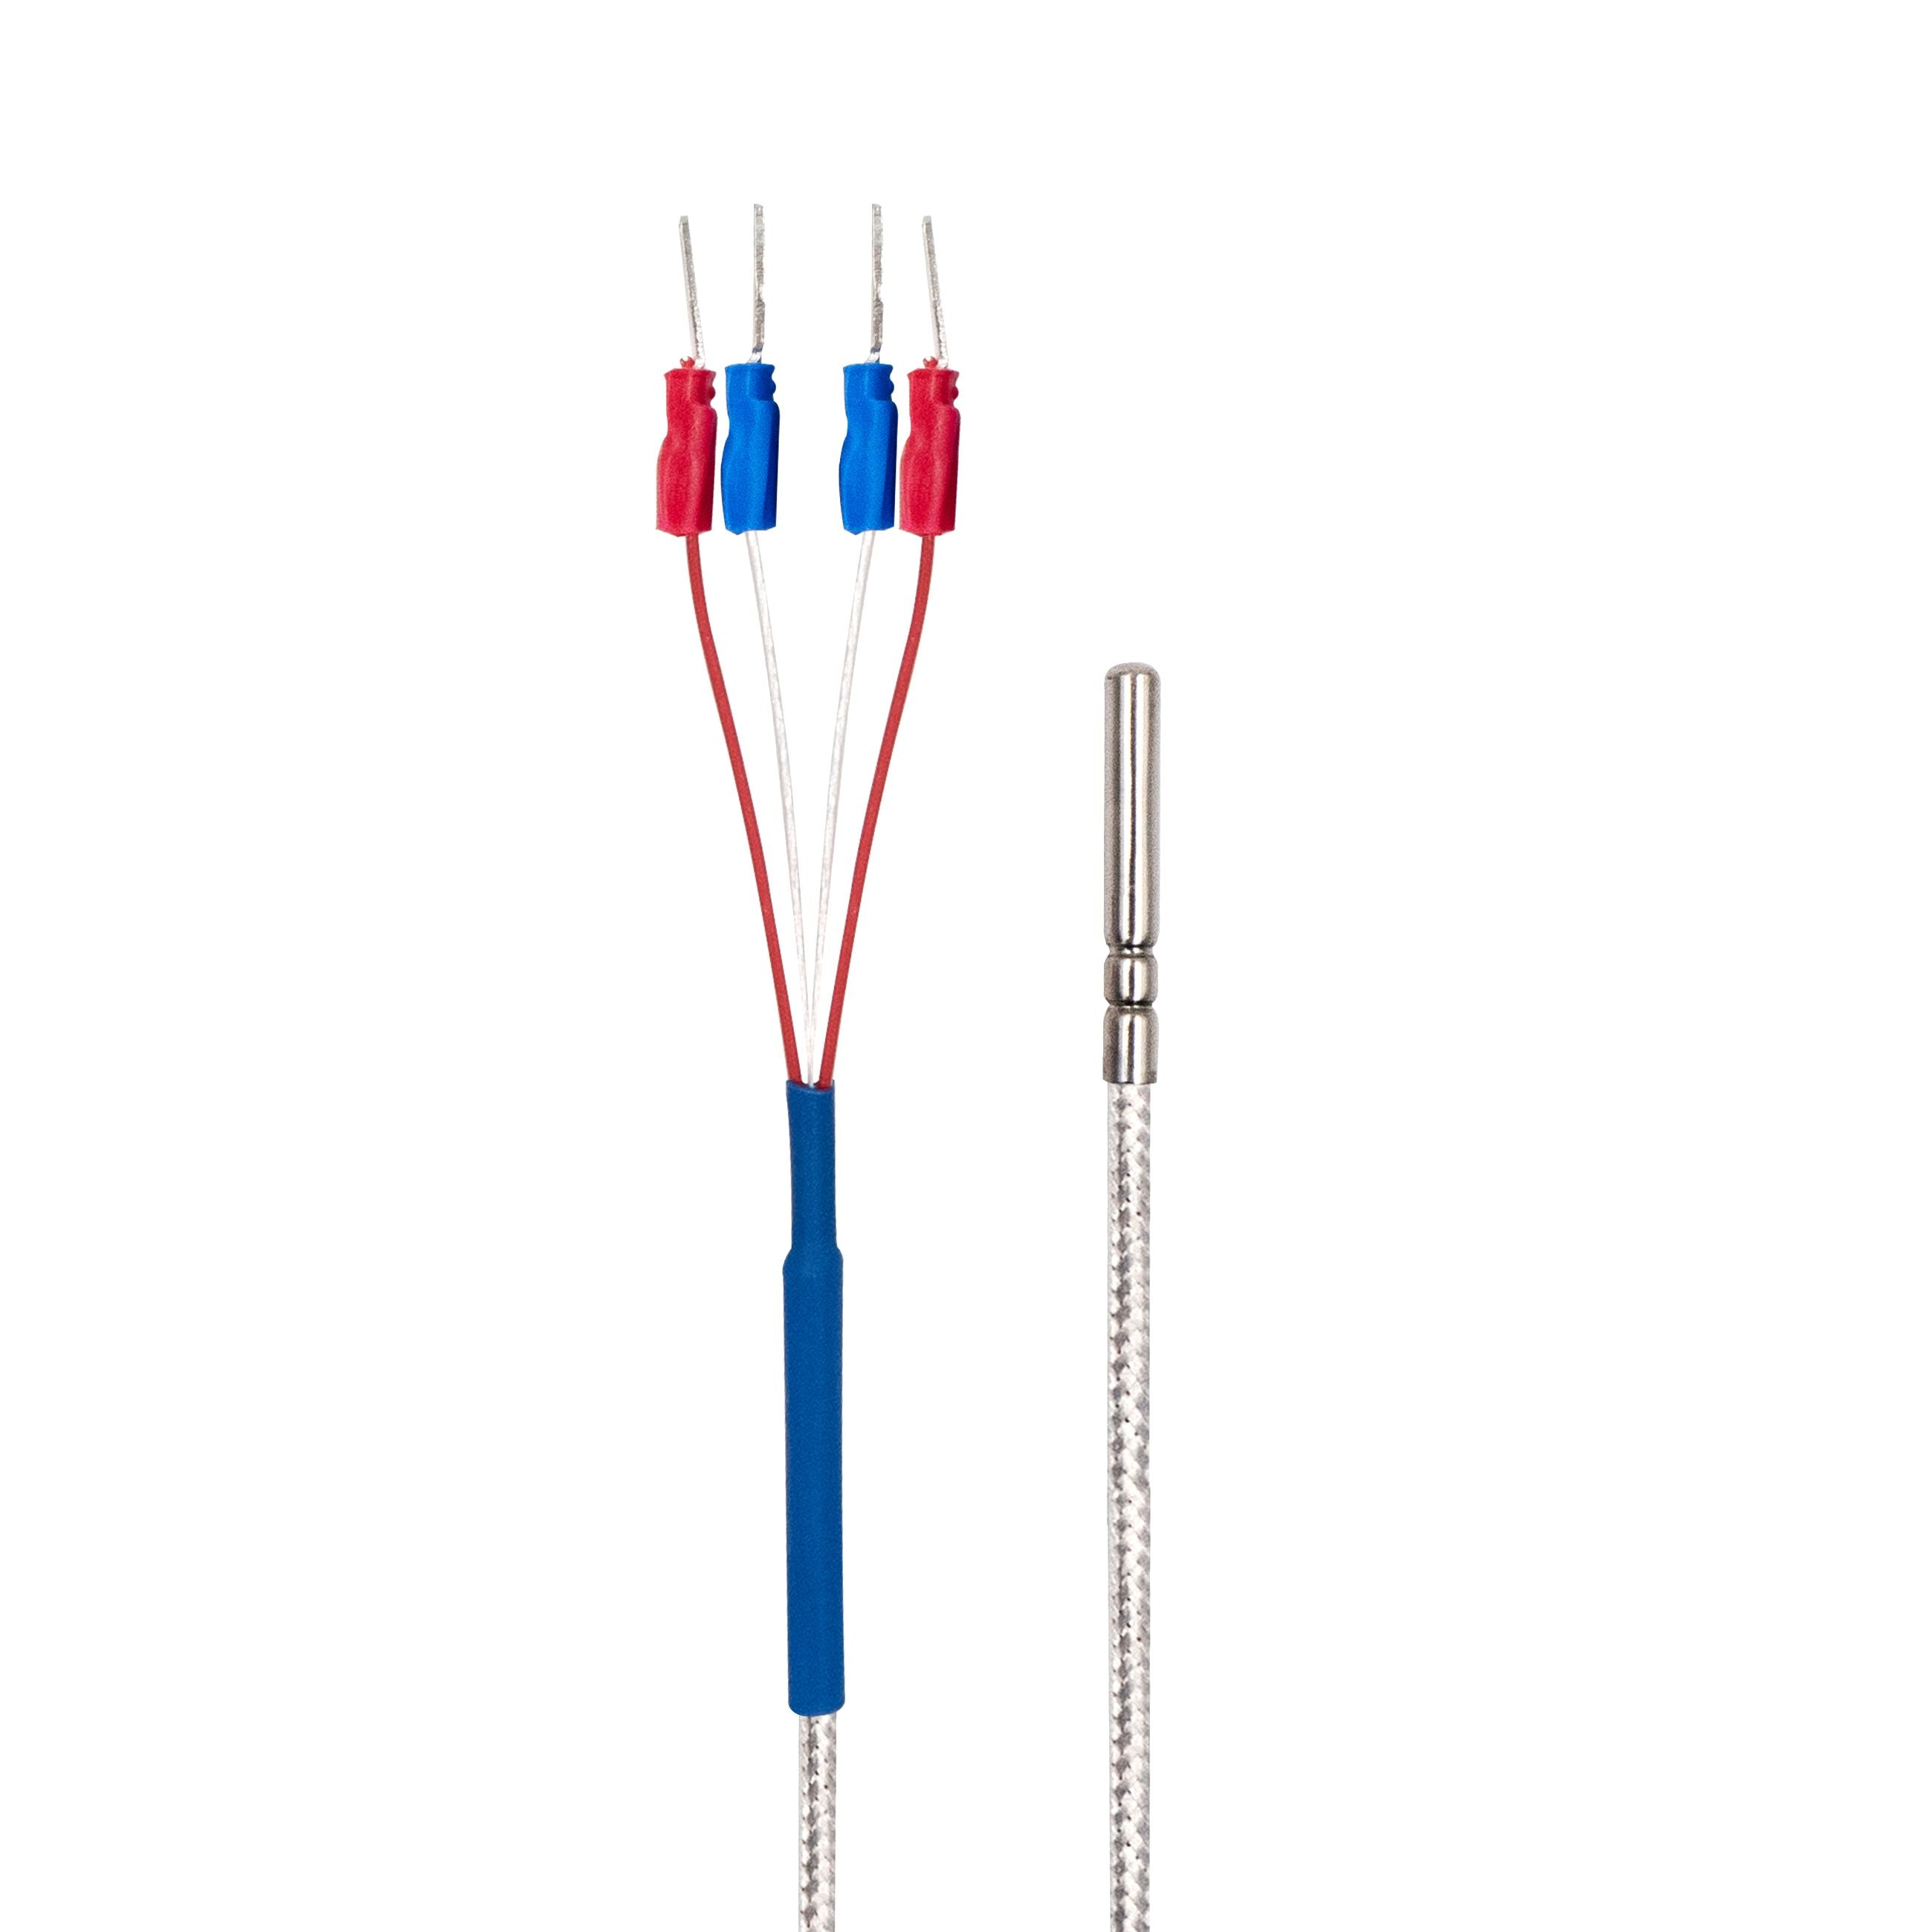 4 Wires Class A Temperature Sensor, White Cable, Straight View